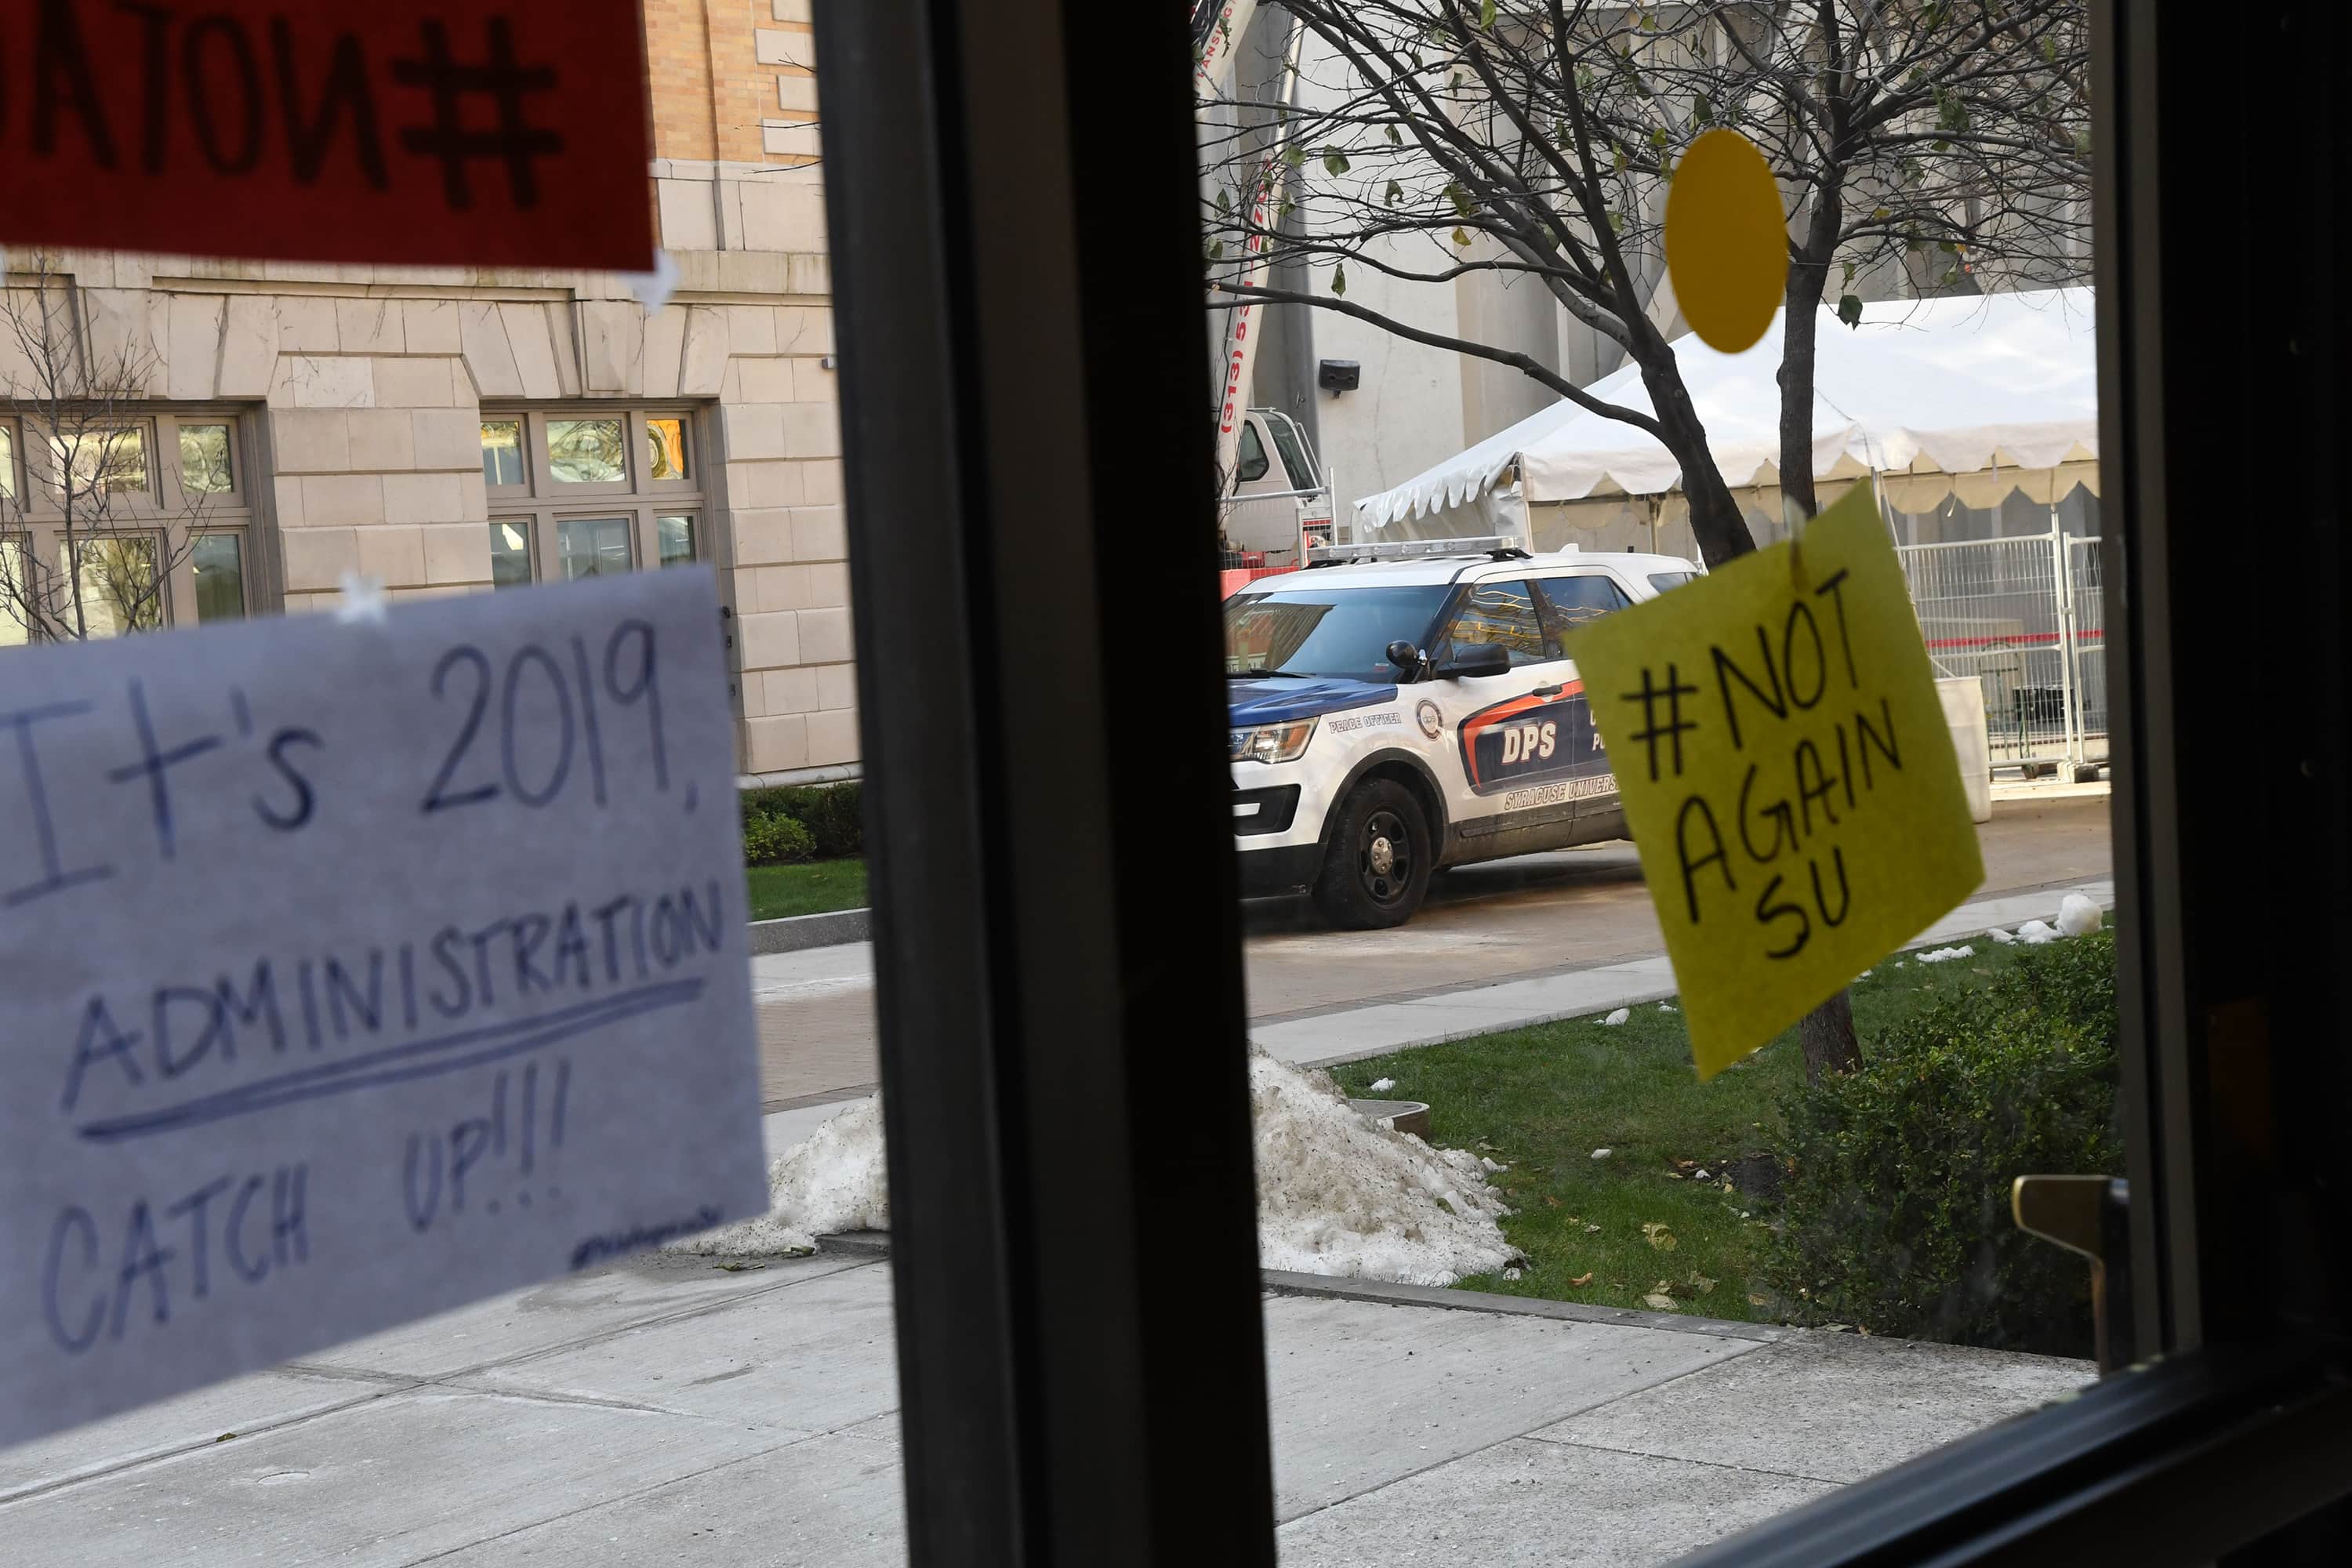 A Department of Public Safety car was parked near Barnes Center where the #NotAgainSU sit-in continued Tuesday.